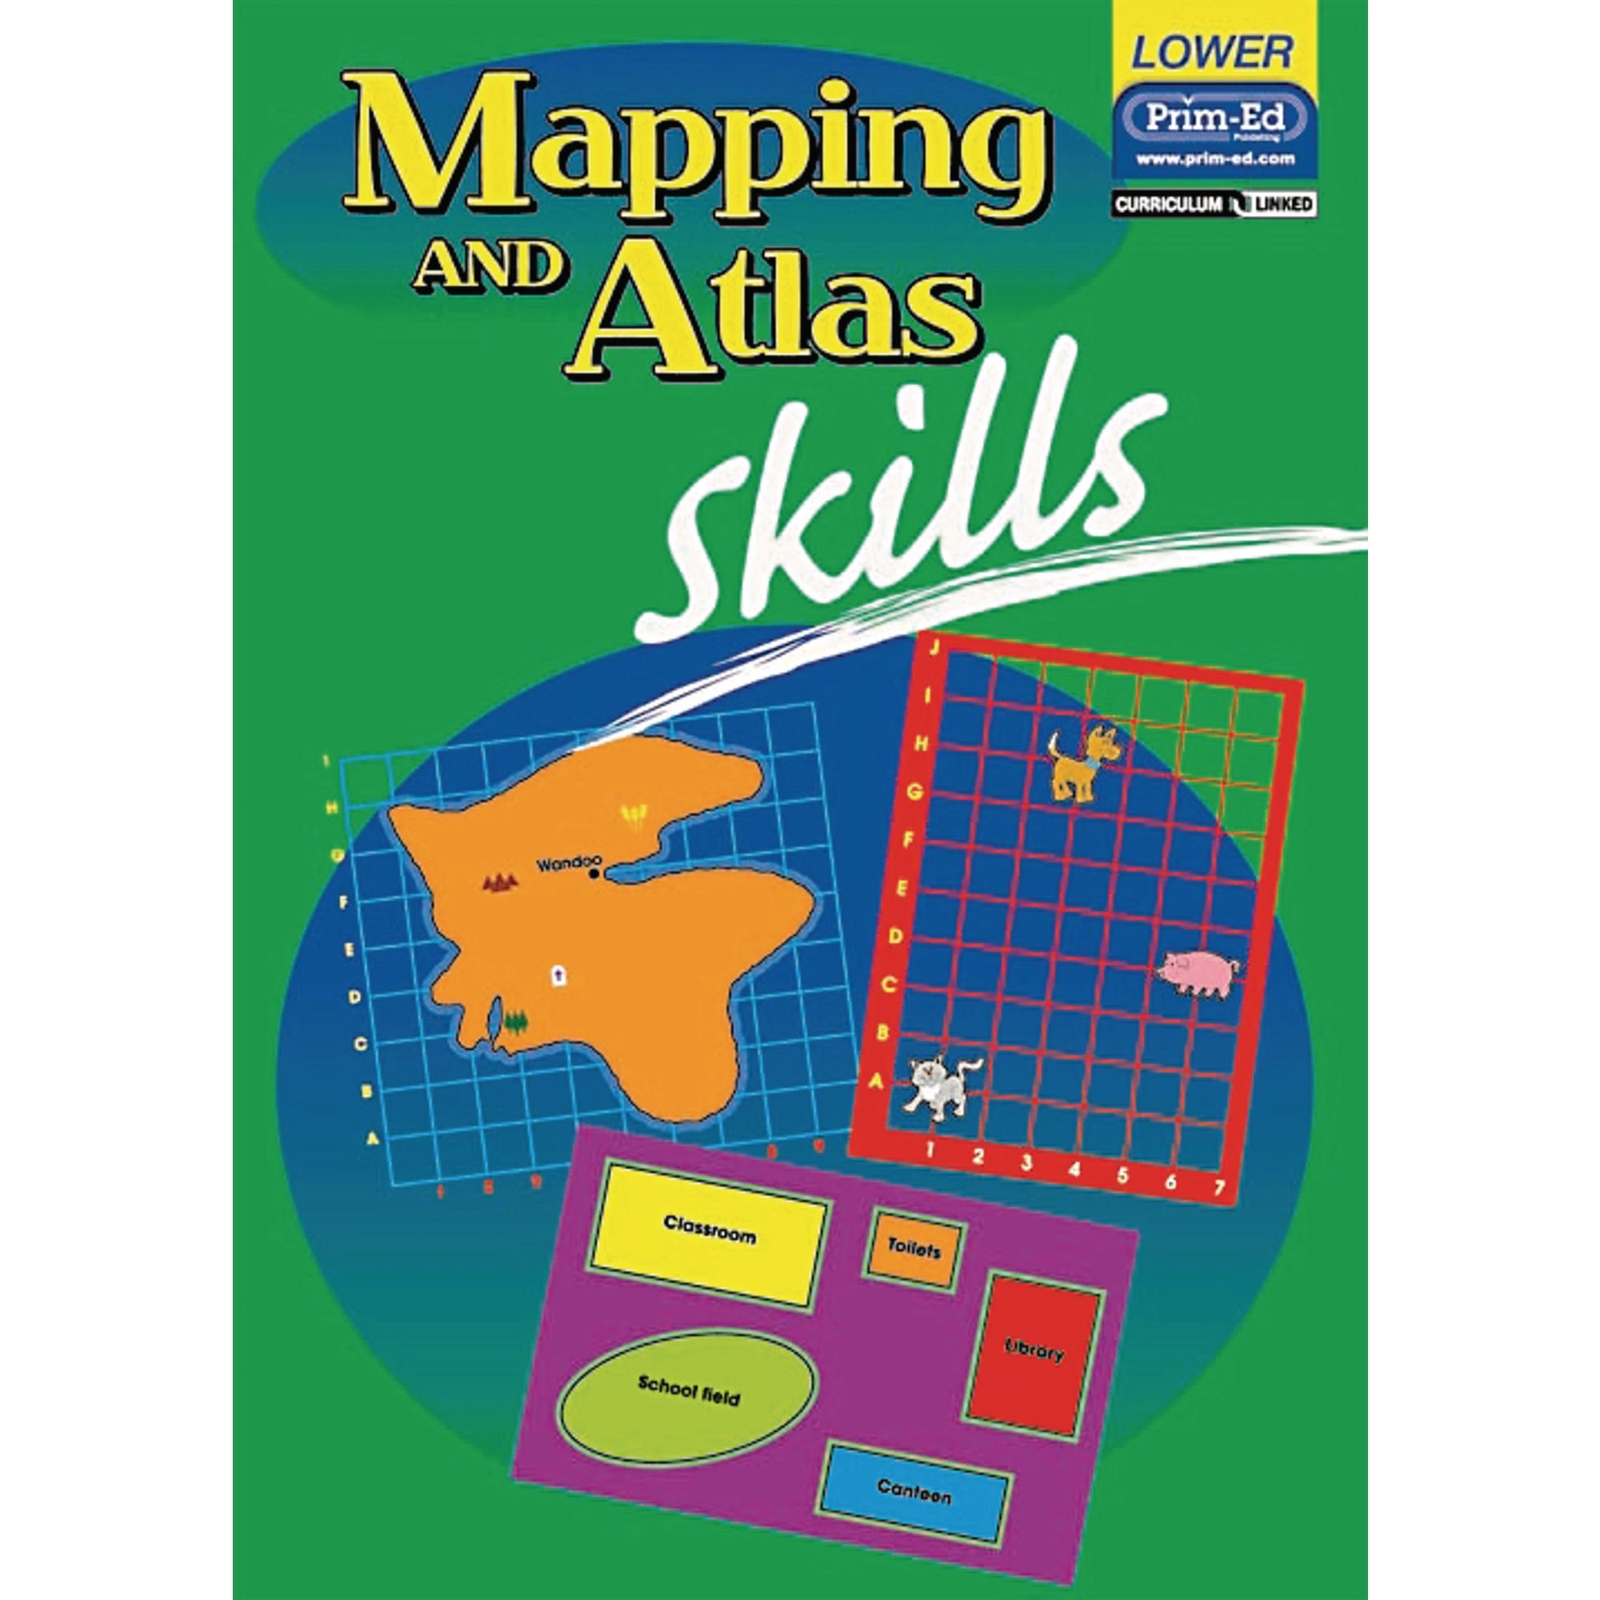 Mapping and Atlas Skills - Lower